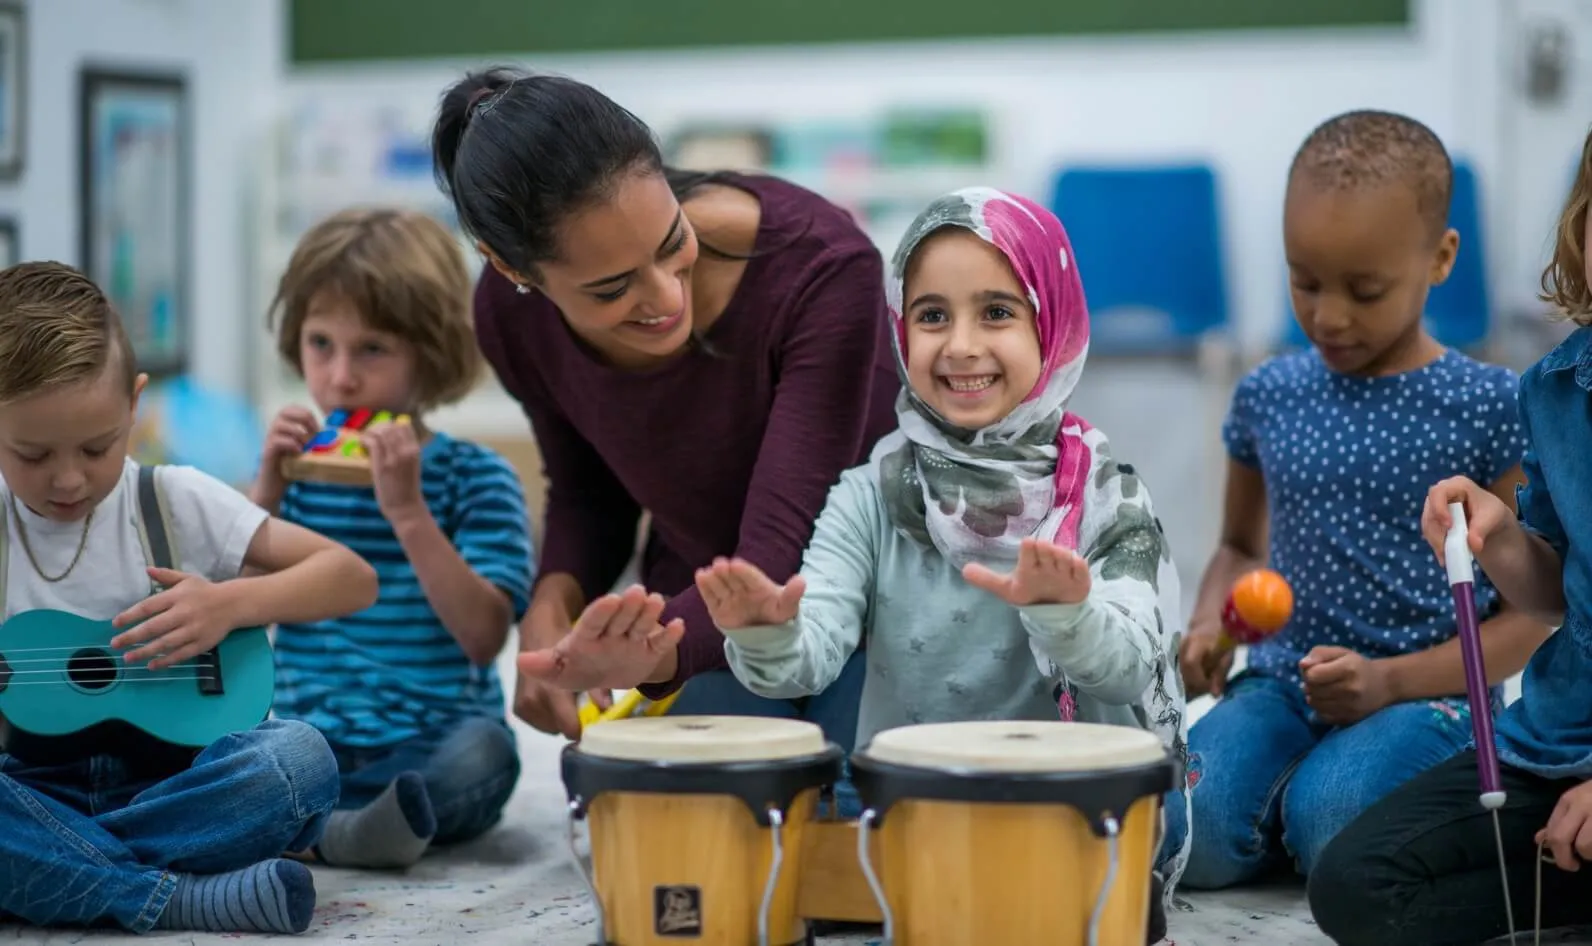 Bonding and Connection Several Benefits of Musical Activities You Can Do With Your Kids